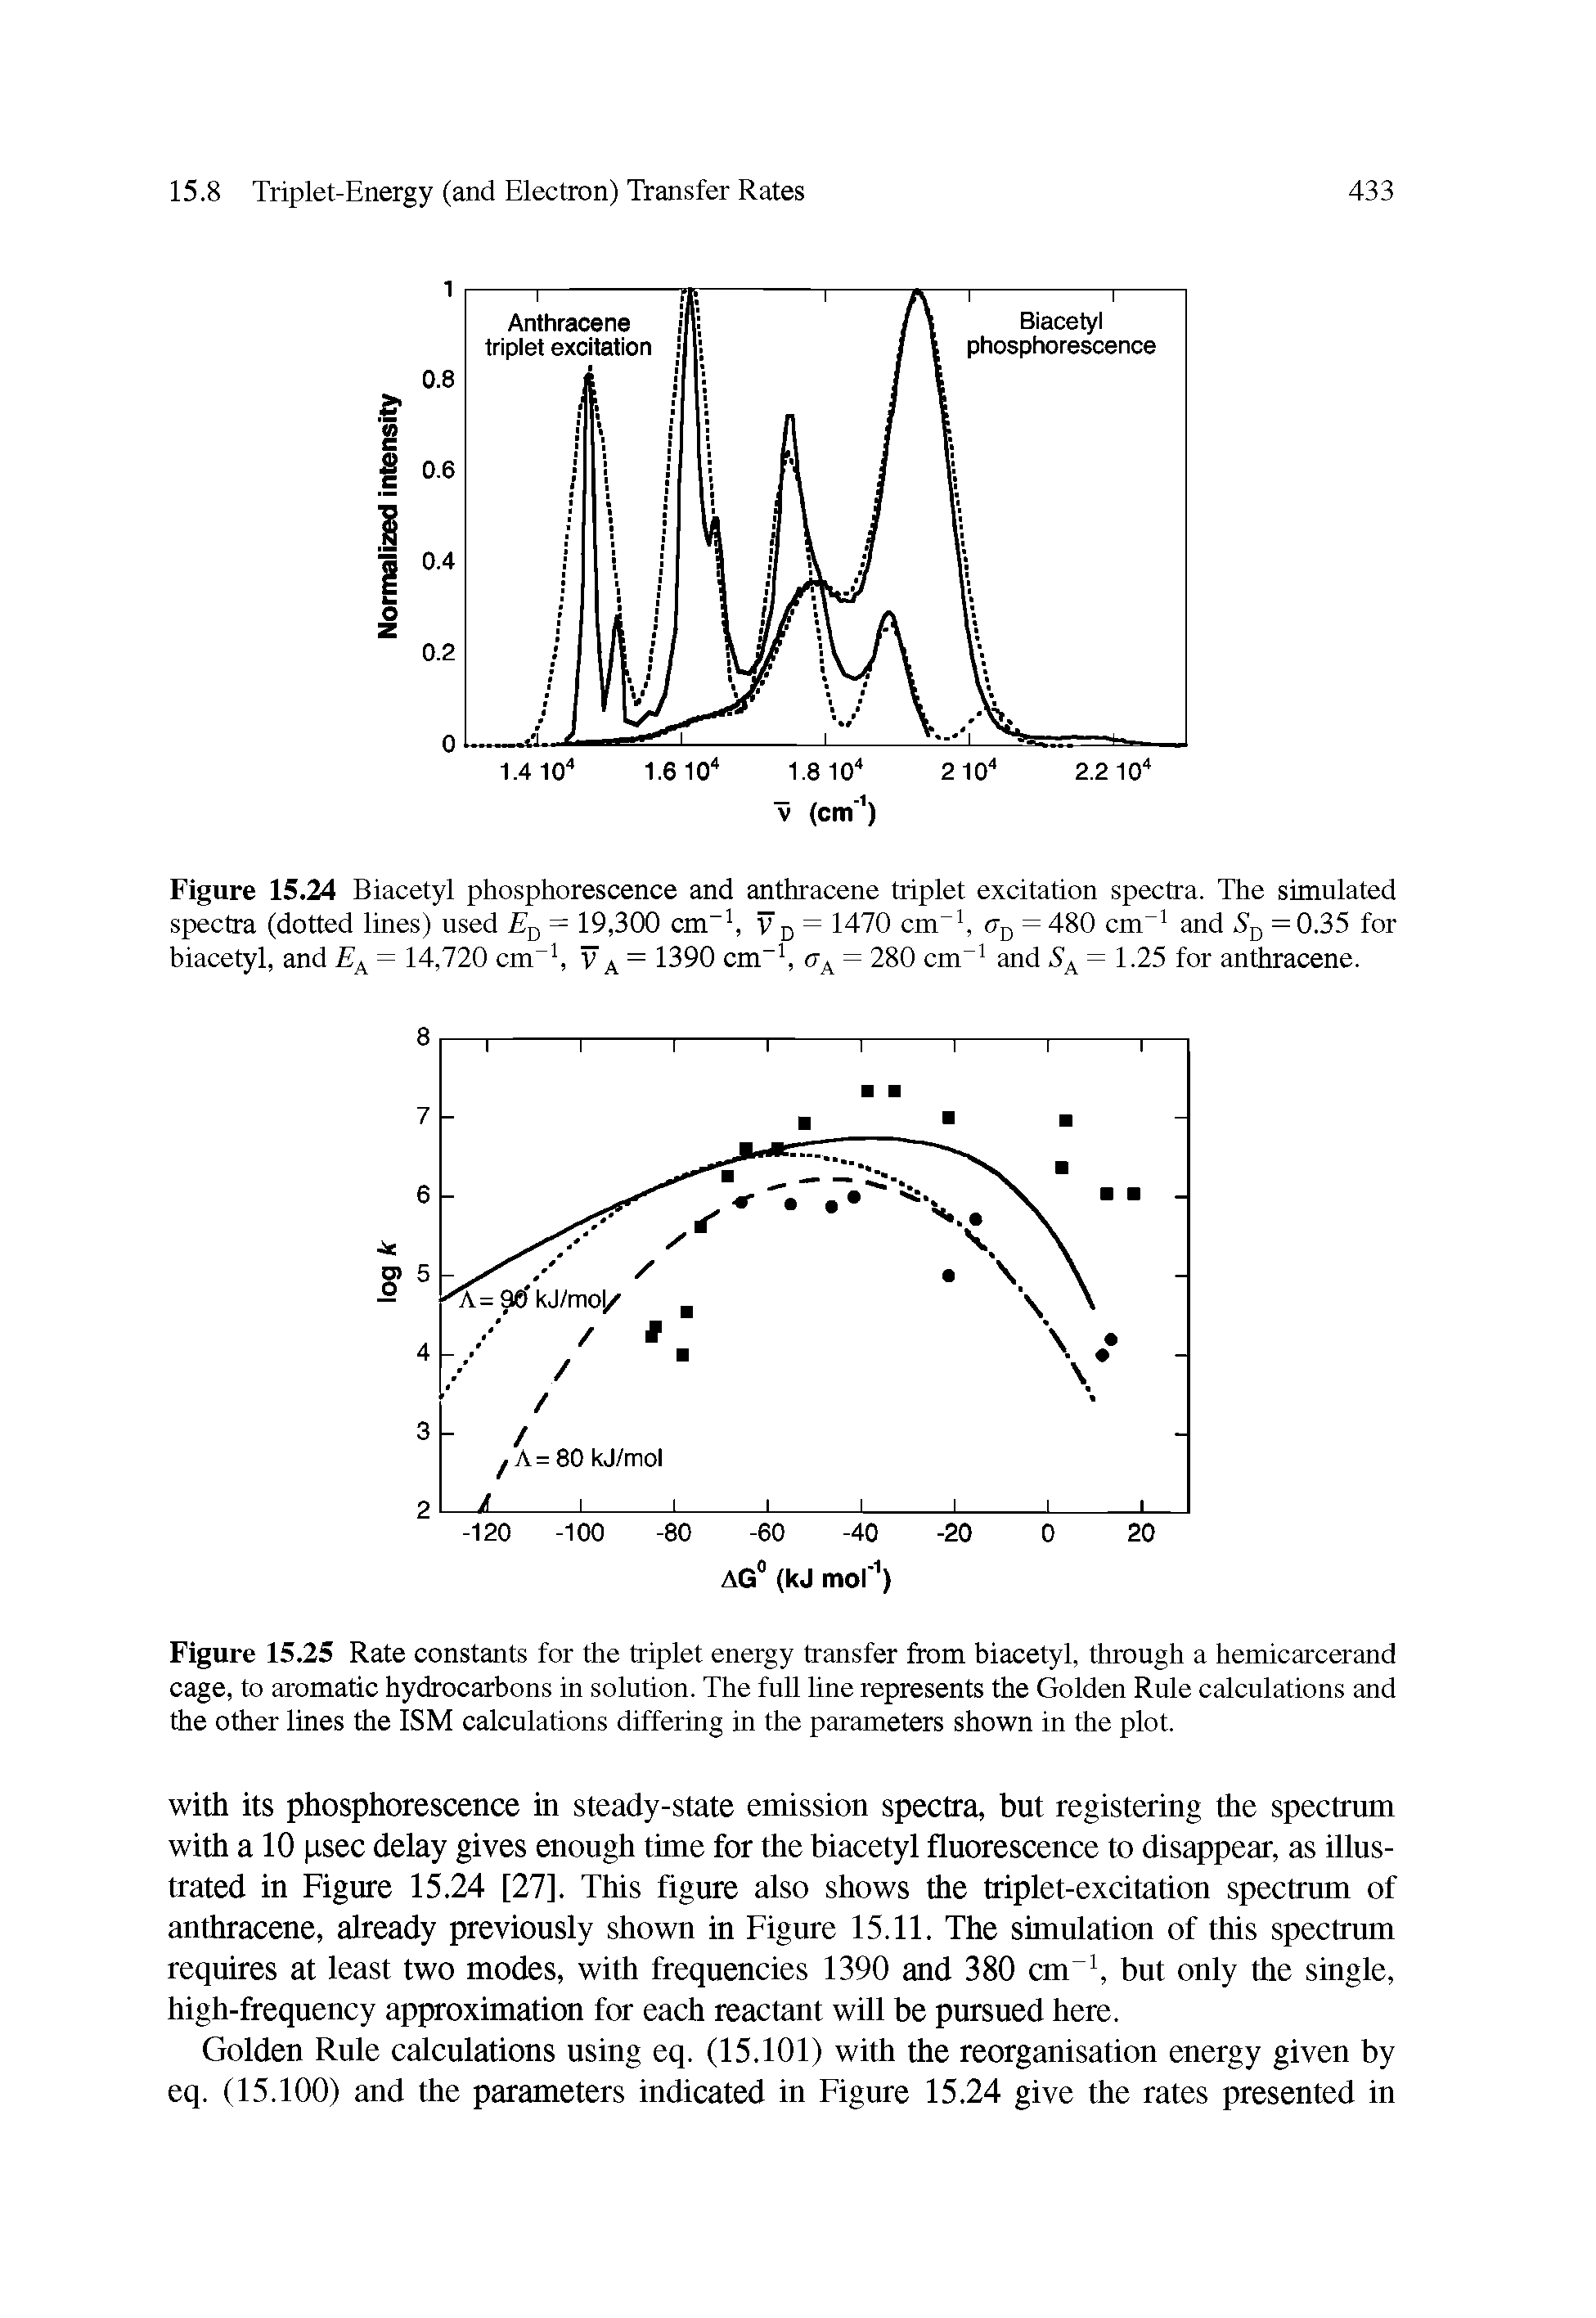 Figure 15.25 Rate constants for the triplet energy transfer from biacetyl, throngh a hemicarcerand cage, to aromatic hydrocarbons in solntion. The fnll line represents the Golden Rnle calcnlations and the other lines the ISM calculations differing in the parameters shown in the plot.